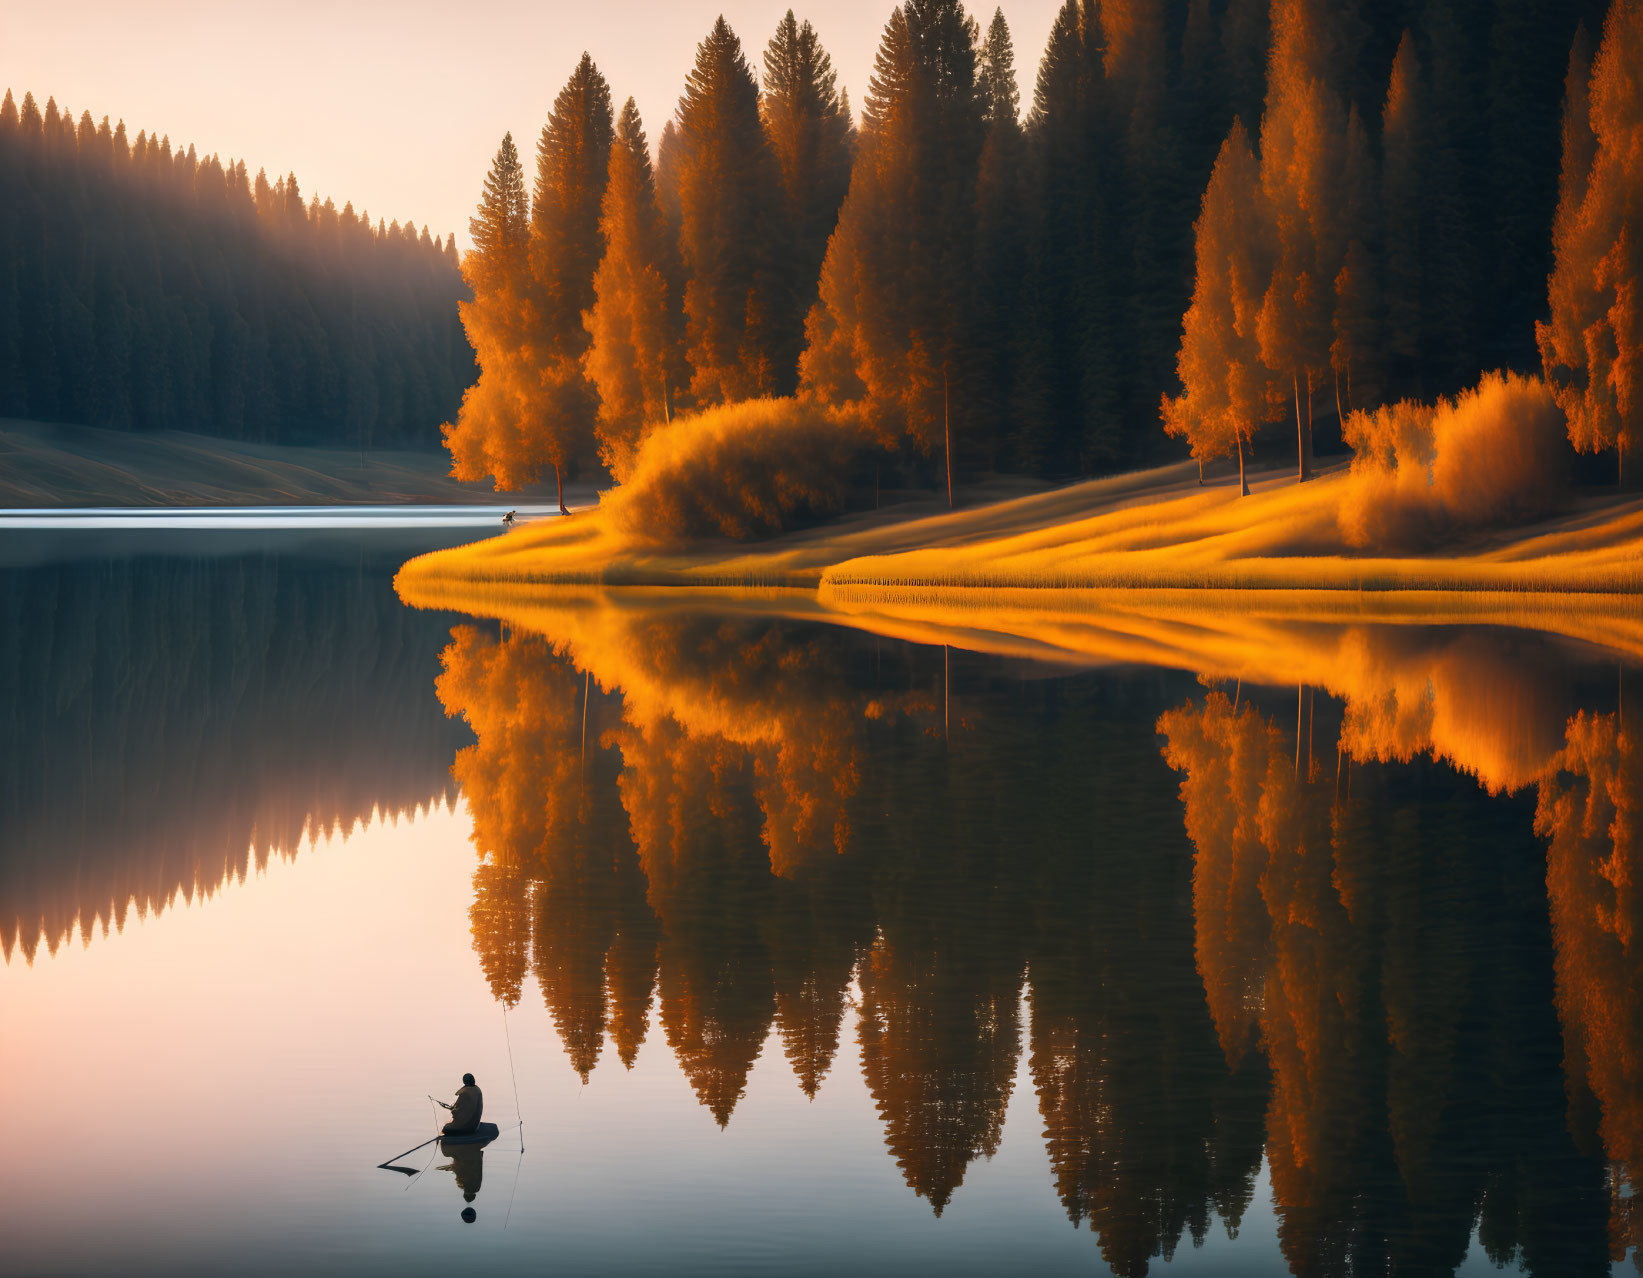 Tranquil autumn lake with lone fisherman and golden foliage